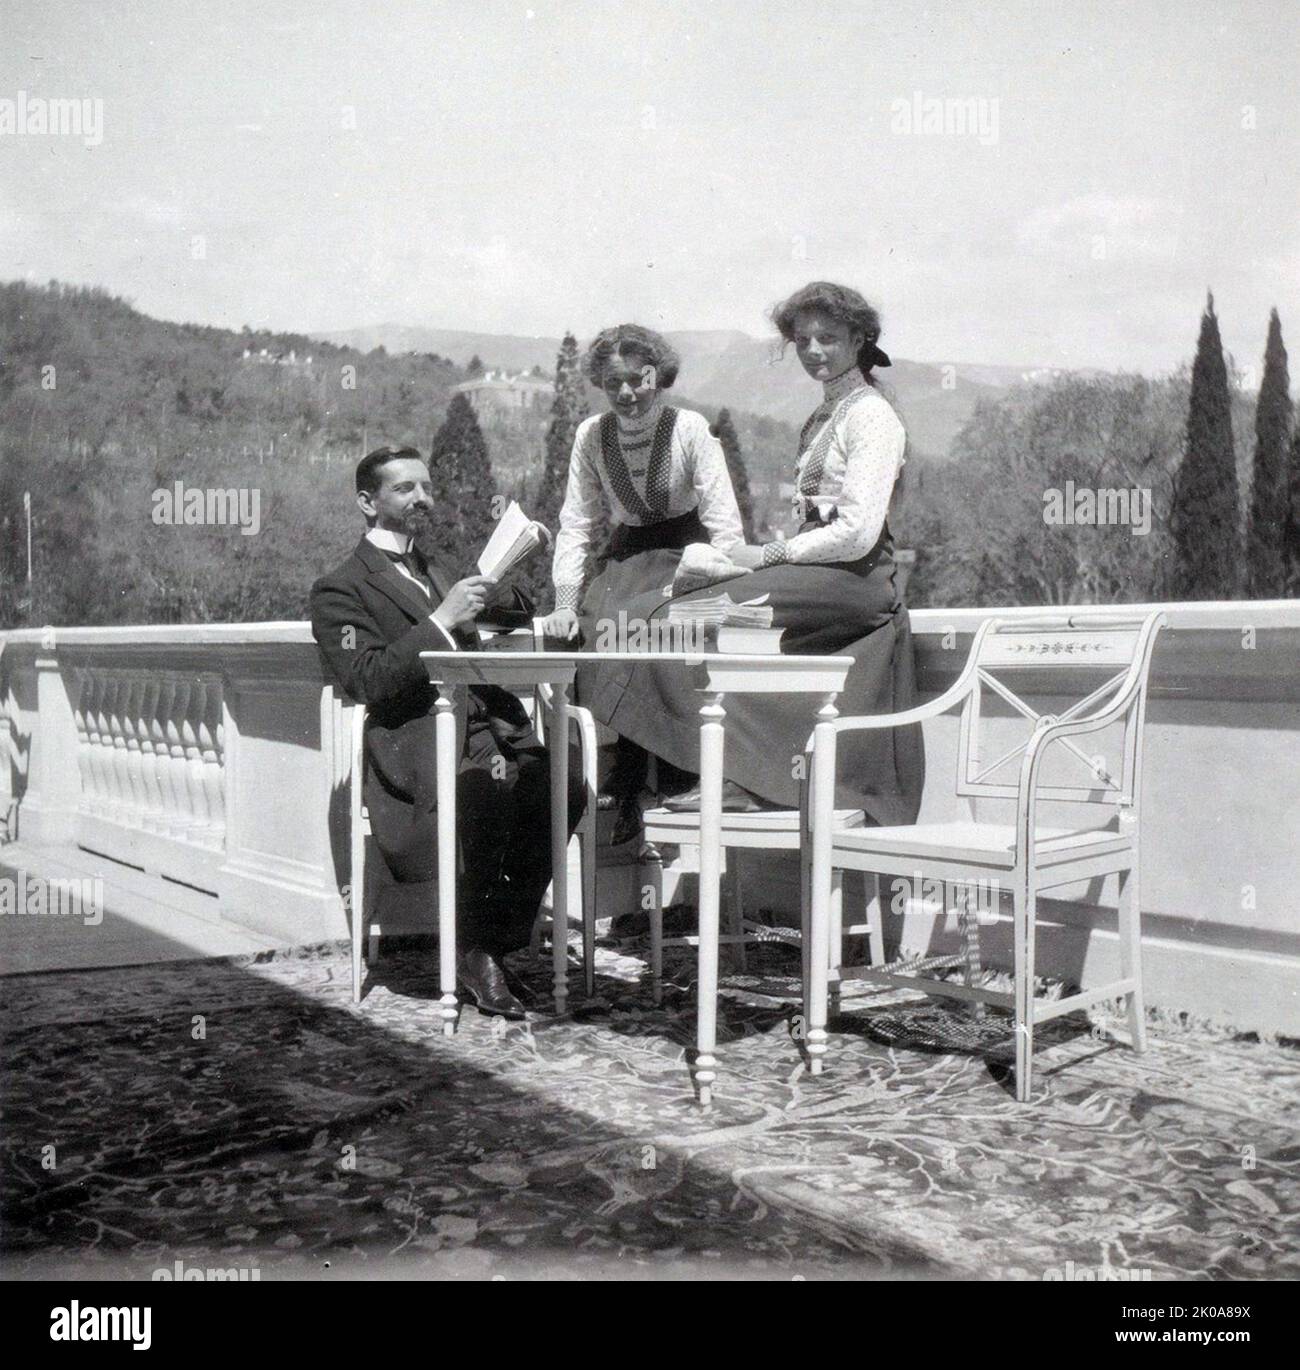 Pierre Gilliard with his pupils, Grand Duchess Olga Nikolaevna of Russia and Grand Duchess Tatiana Nikolaevna of Russia at Livadia in 1911. Pierre Gilliard (16 May 1879 - 30 May 1962) was a Swiss academic and author, best known as the French language tutor to the five children of Emperor Nicholas II of Russia from 1905 to 1918 Stock Photo